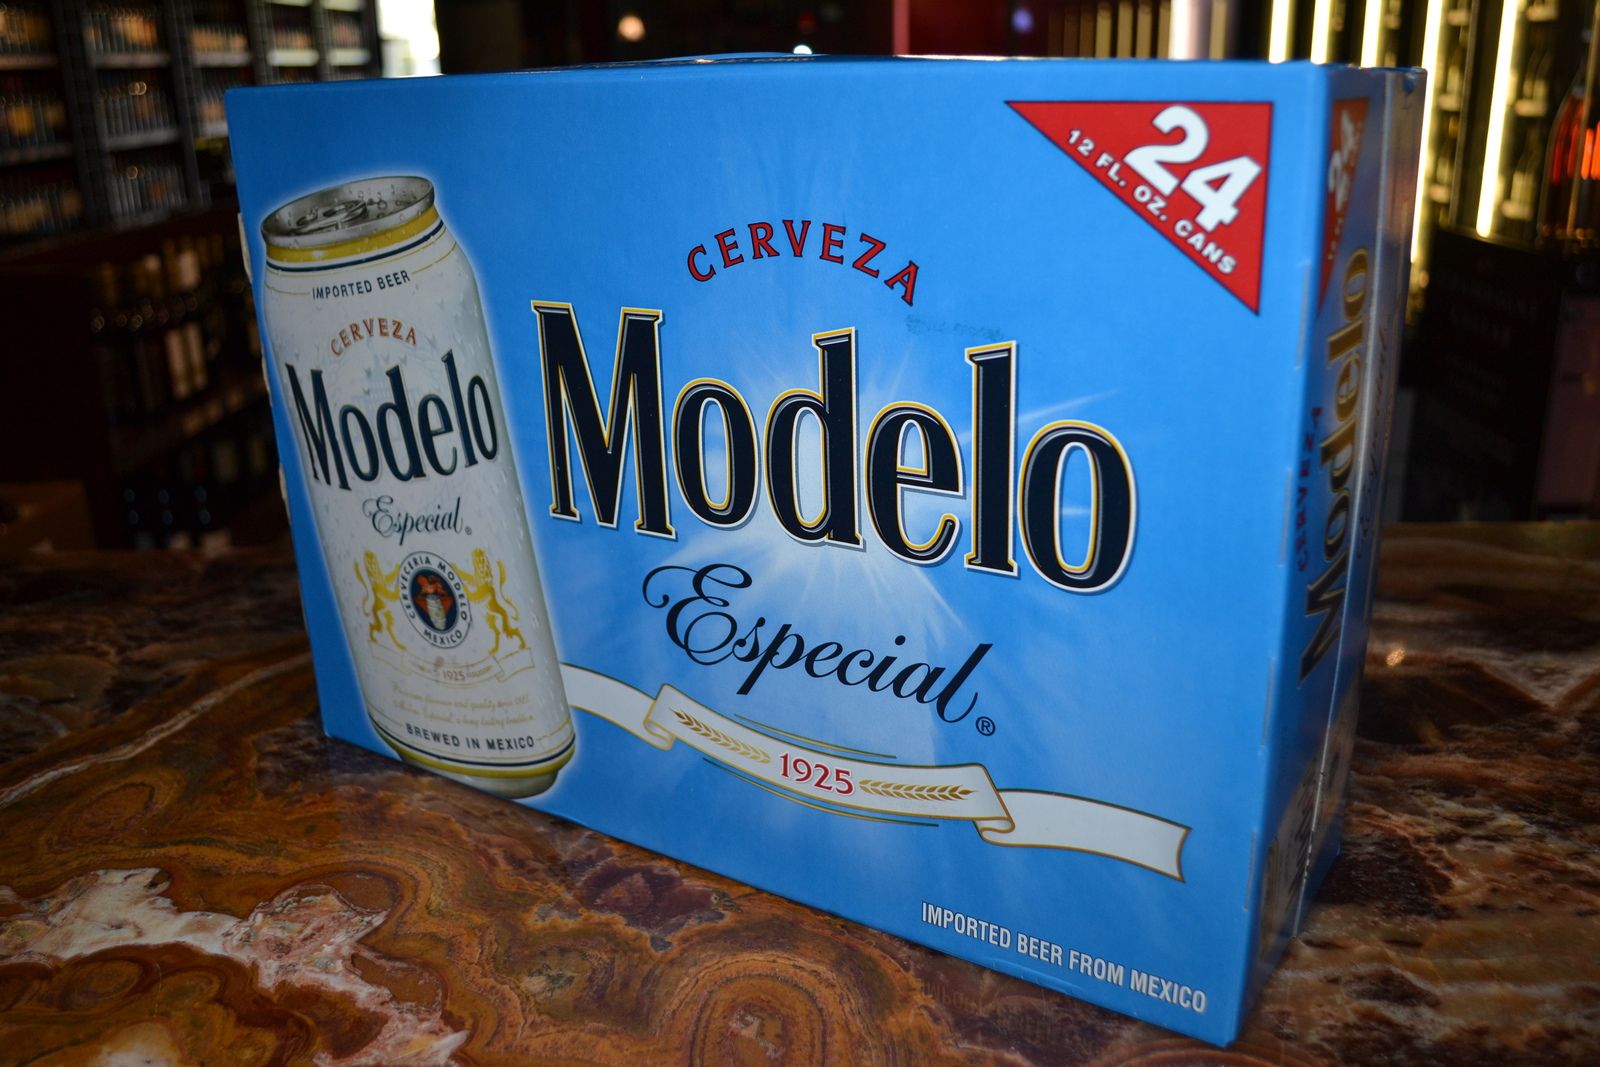 Modelo Especial Beer, Imported - 24 pack, 12 fl oz cans